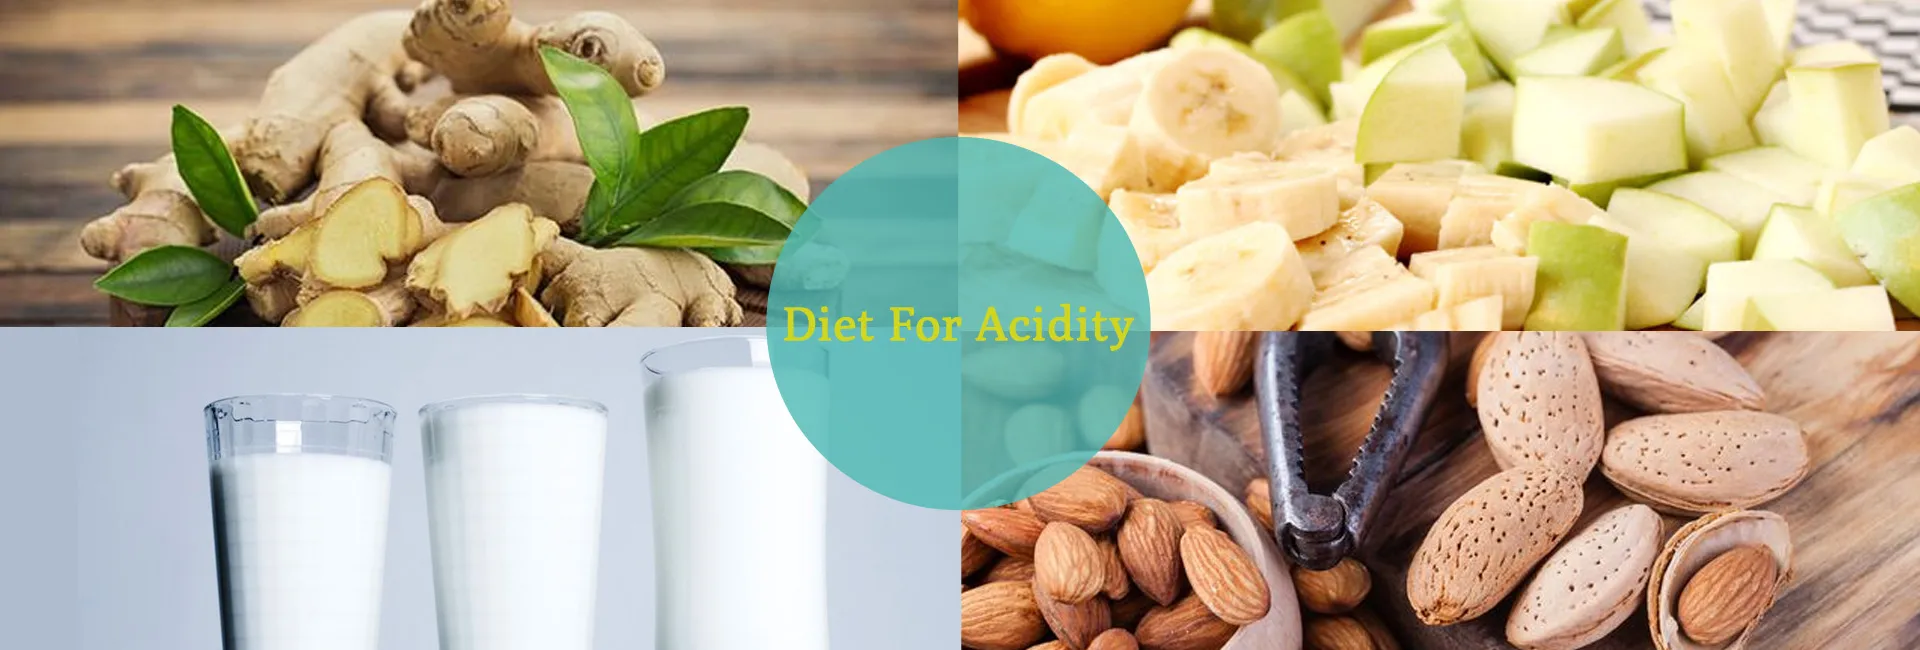 Diet For Acidity In Abu Dhabi